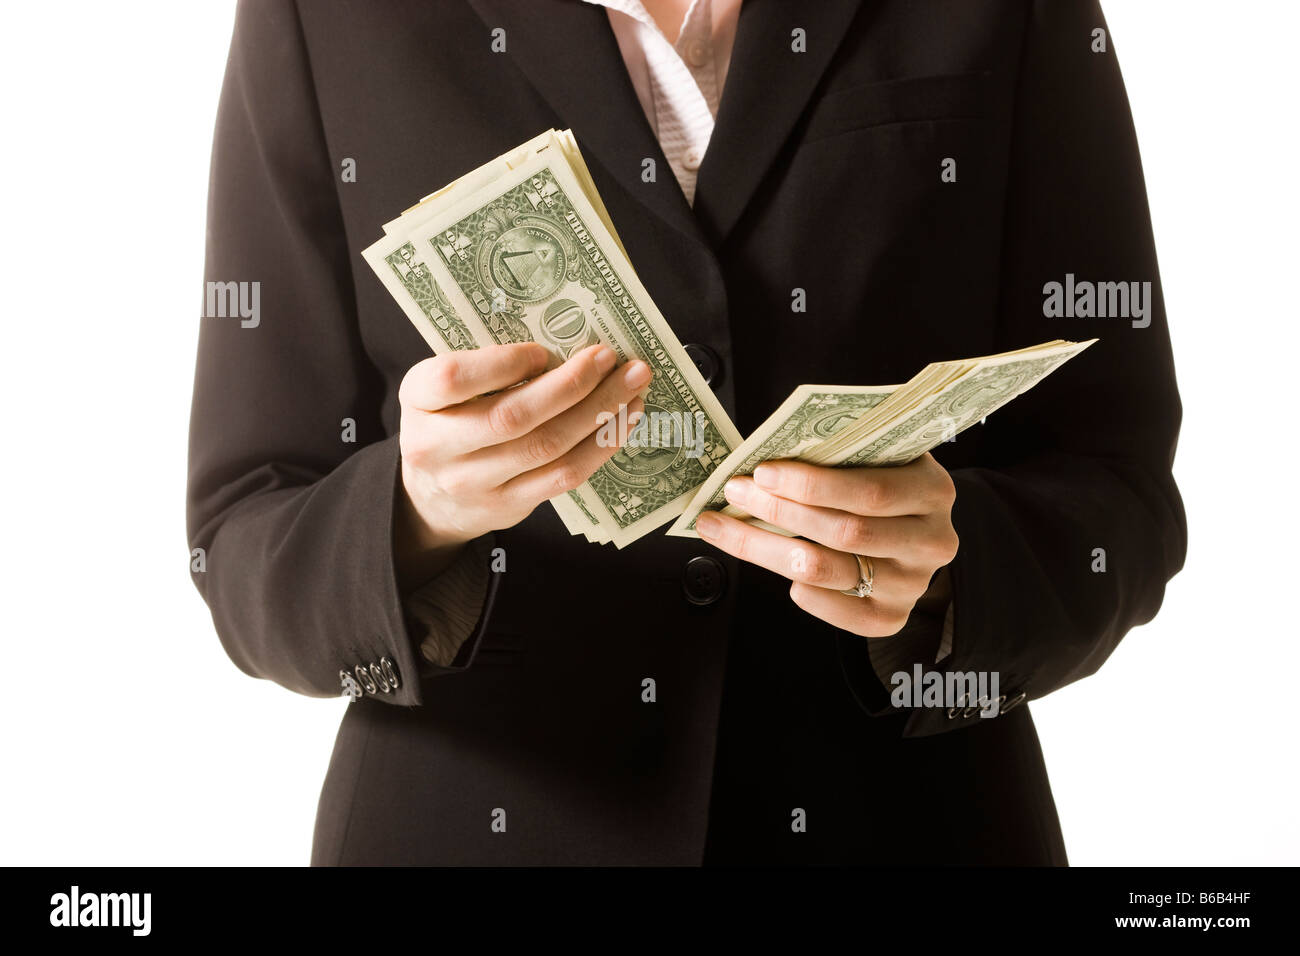 woman counting money Stock Photo